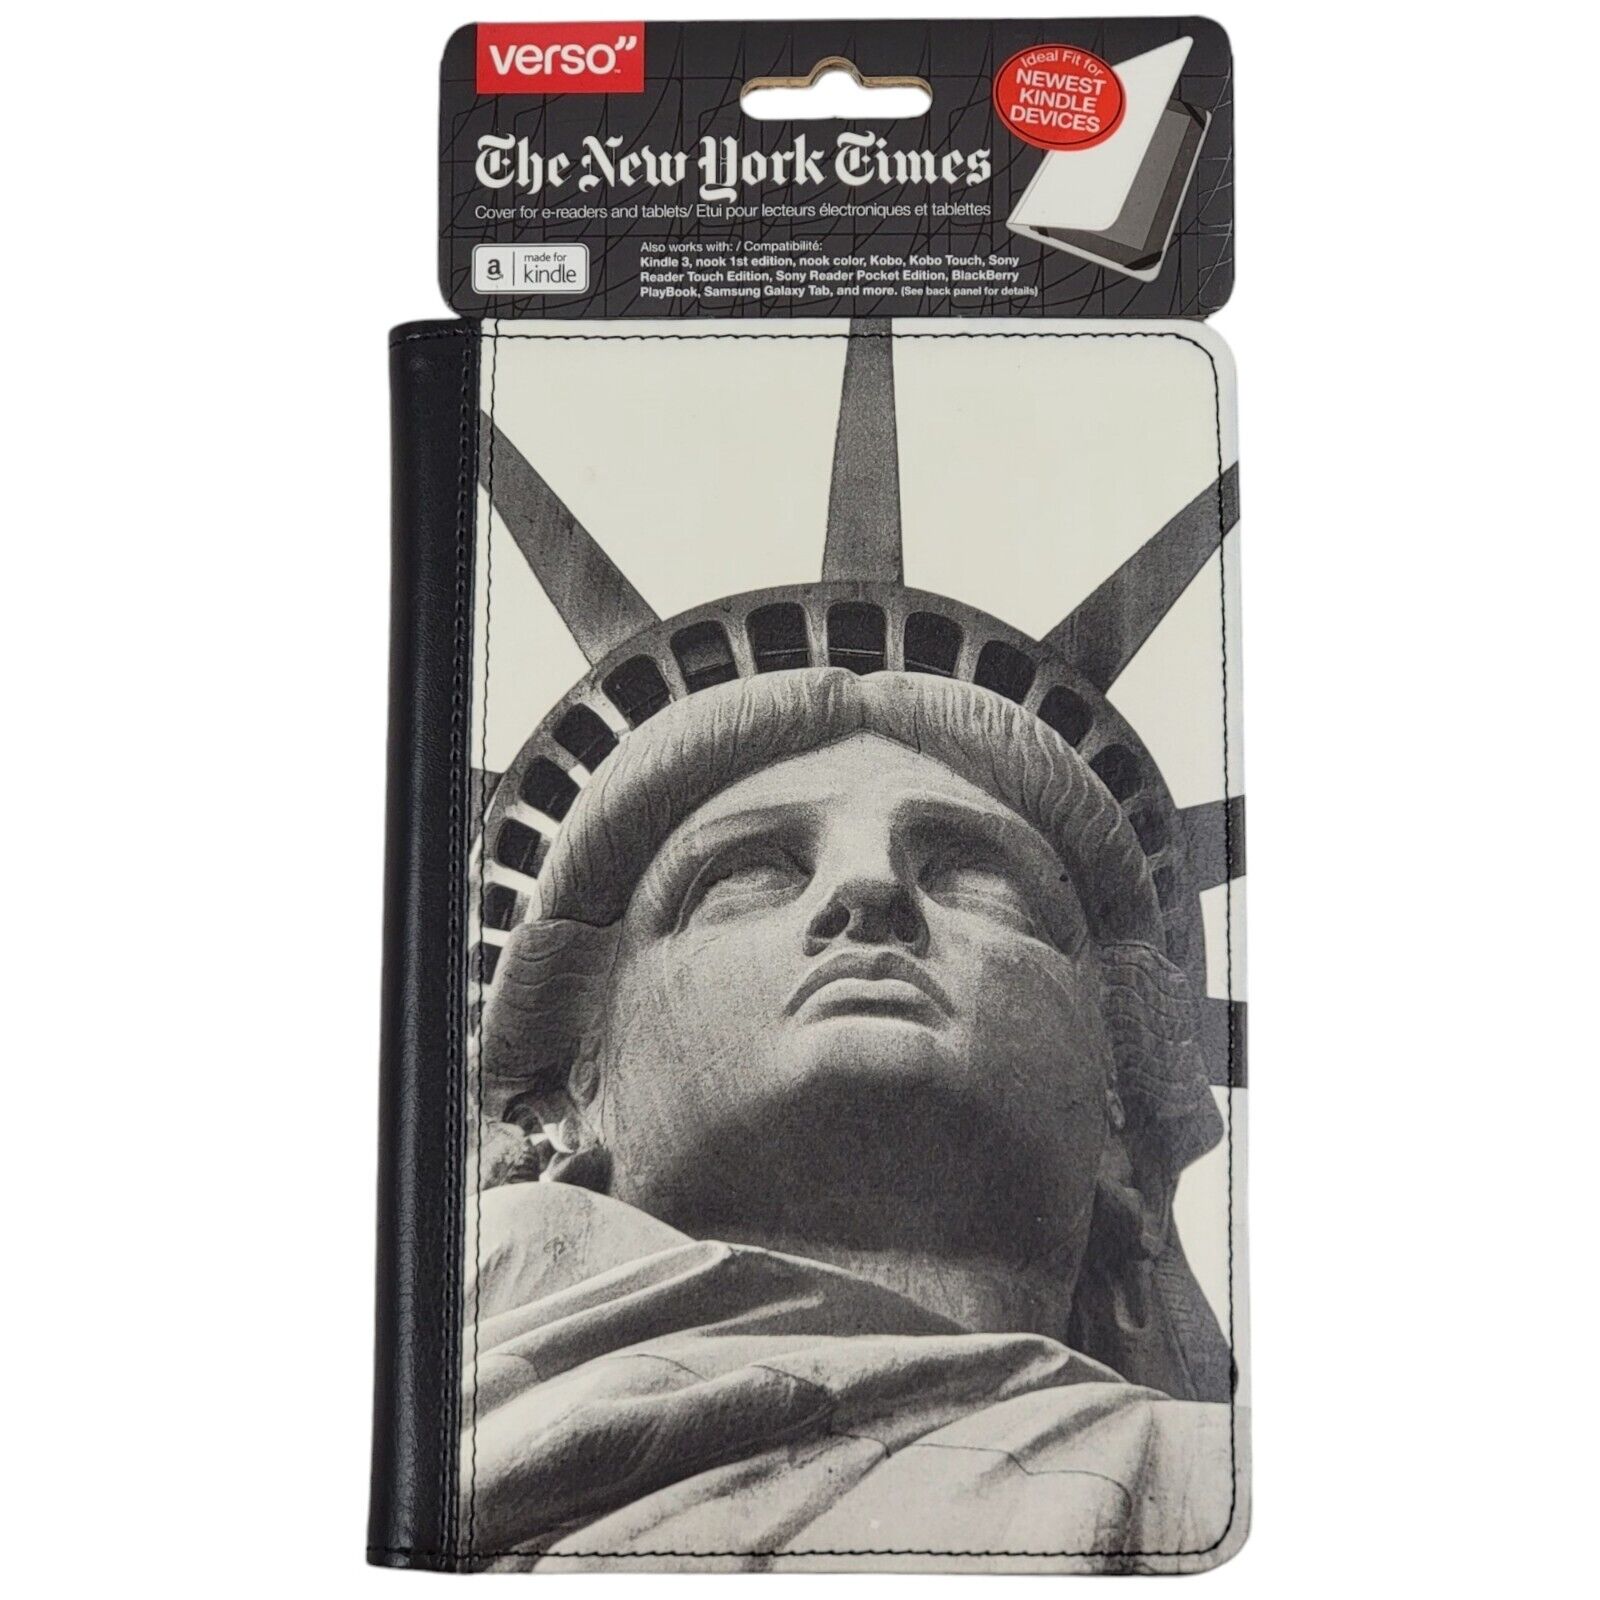 The New York Times Cover For E-Readers & Tablets Kindle 3, Nook, Samsung & More